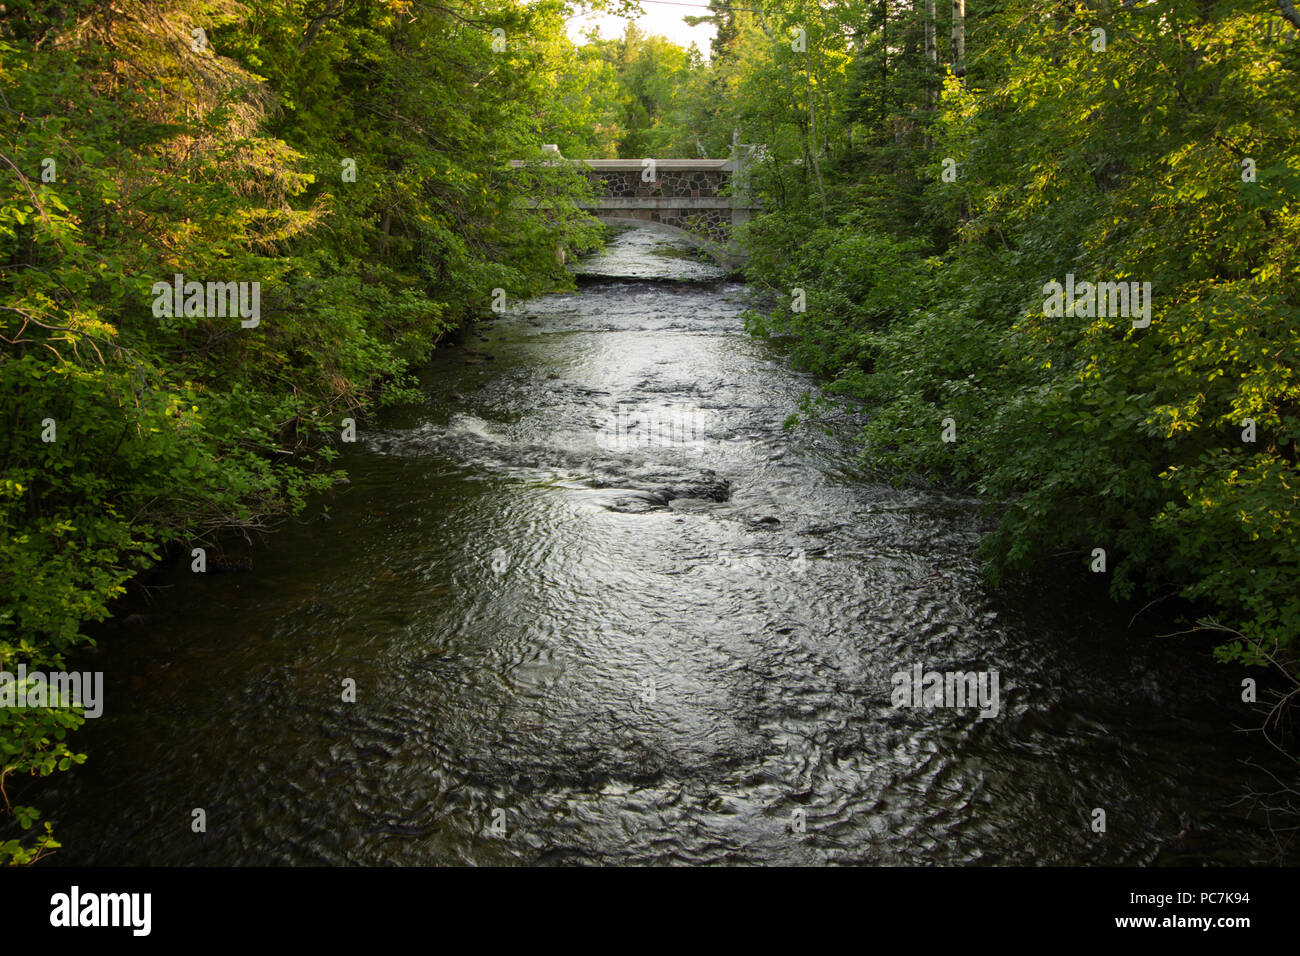 Forest River Nature Background. River flows through the lush north woods of Michigan. Fort Wilkins State Park, Copper Harbor, Michigan Stock Photo